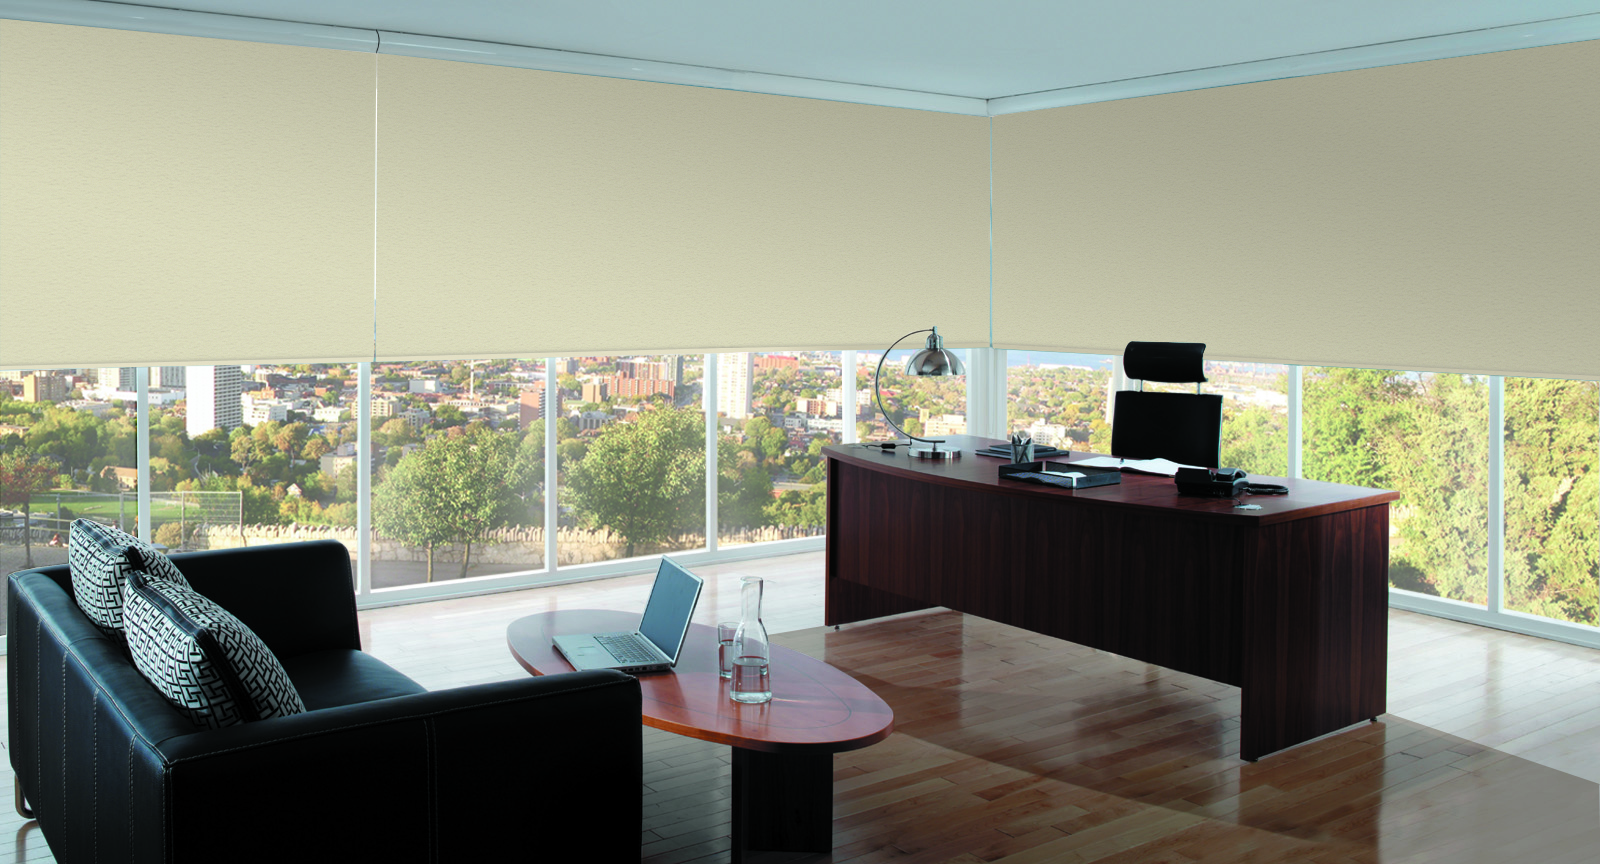 Made-to-Measure Blinds for Commercial Spaces